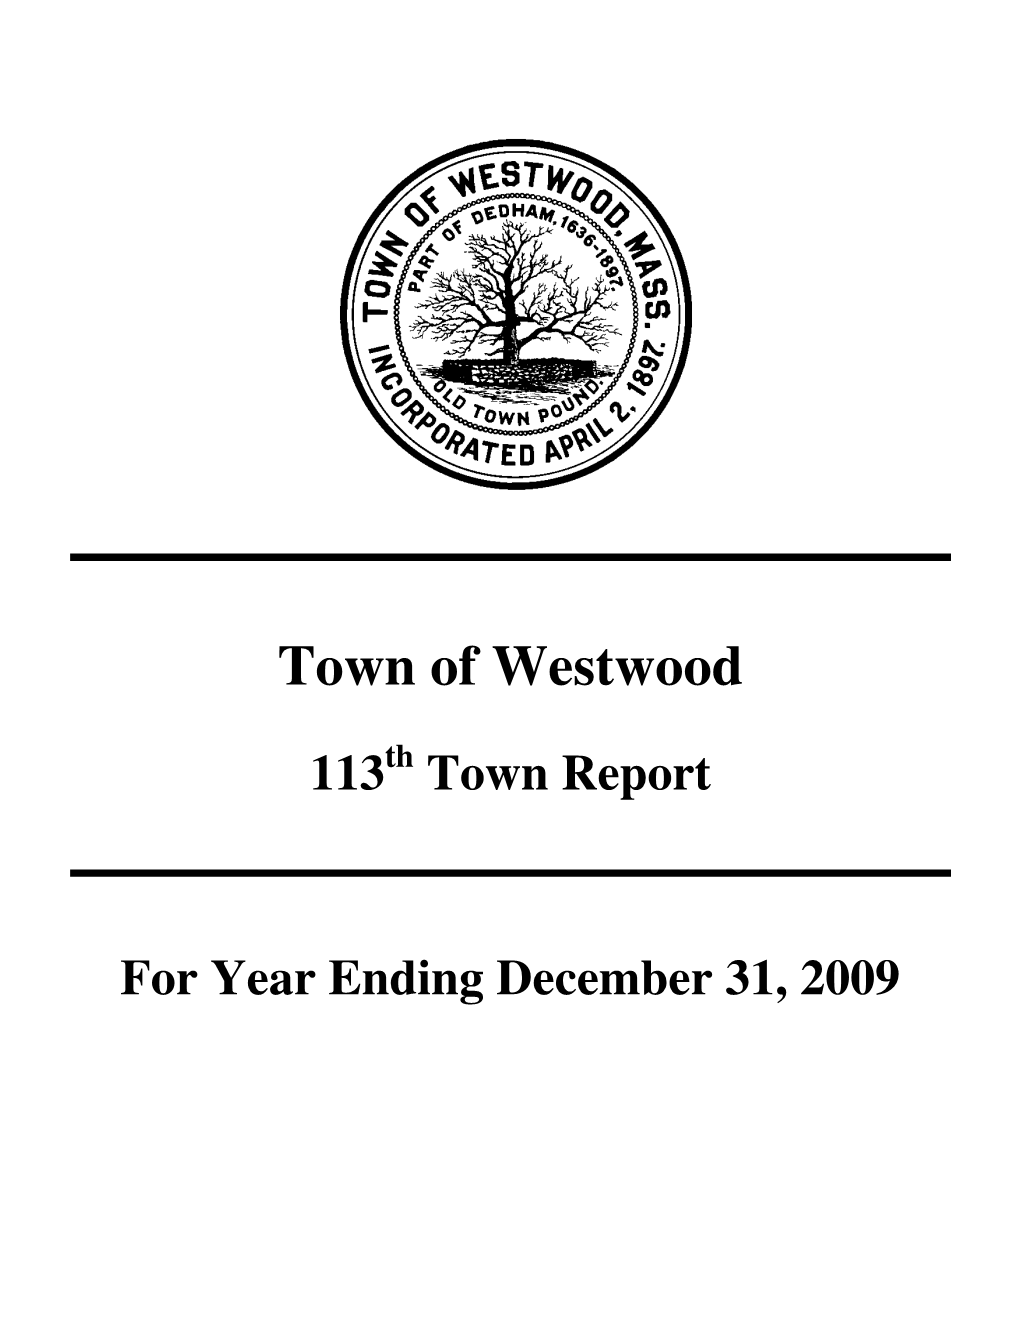 Town Report for Year Ending December 31, 2009